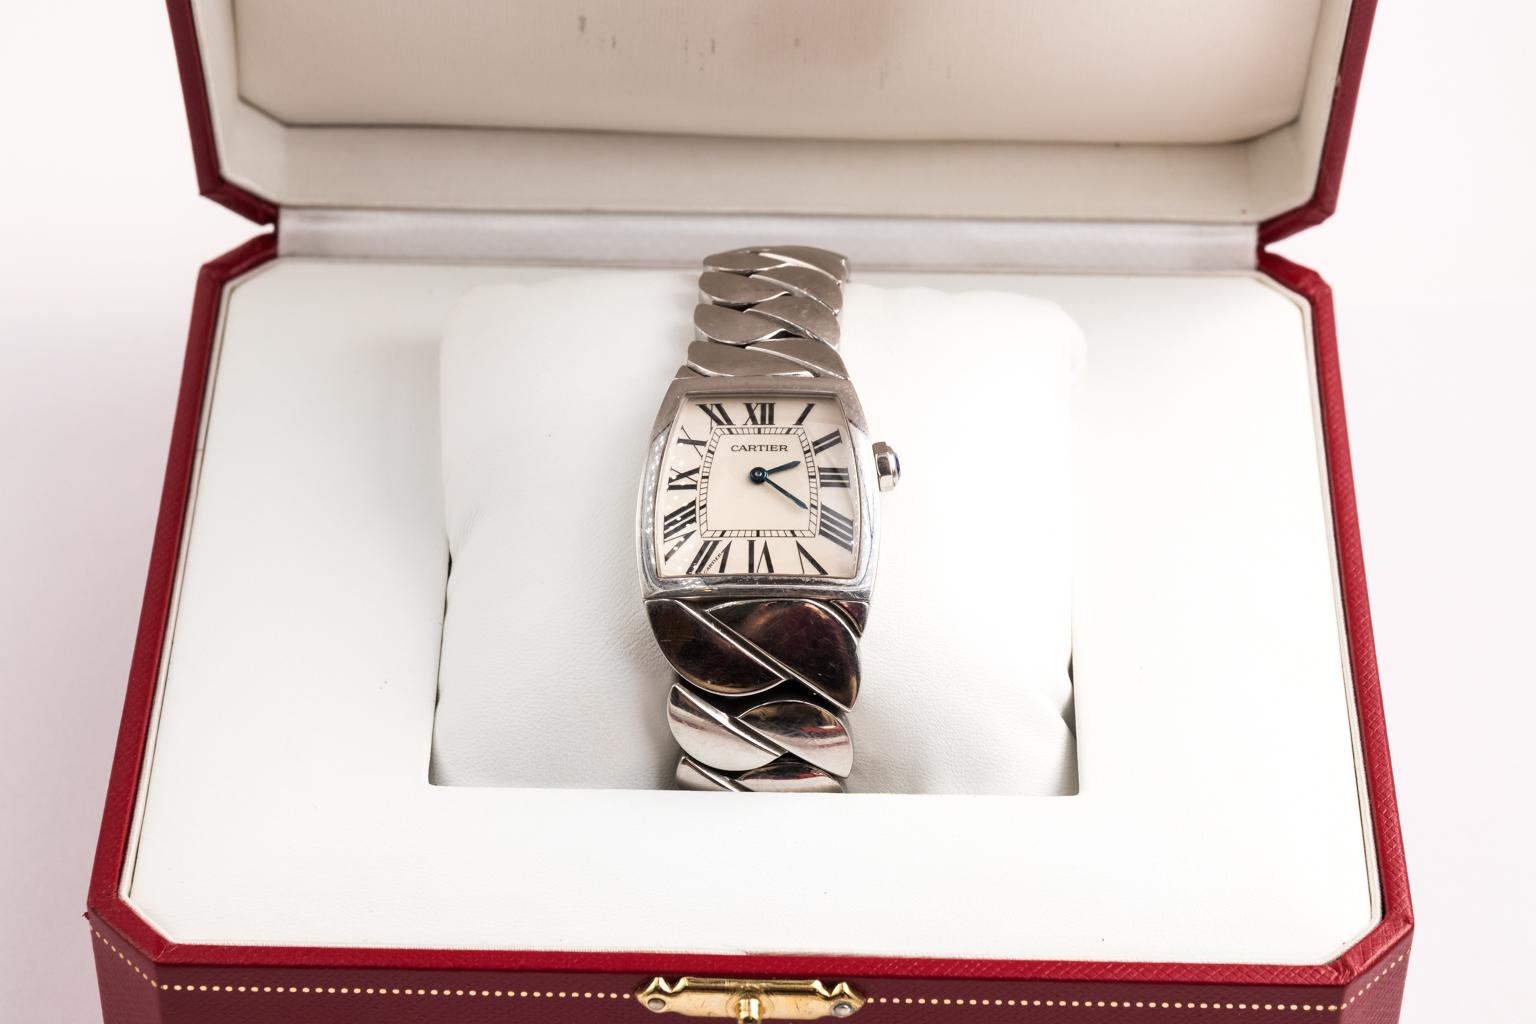 Cartier La Dona stainless steel watch with case. Comes with certificate.
